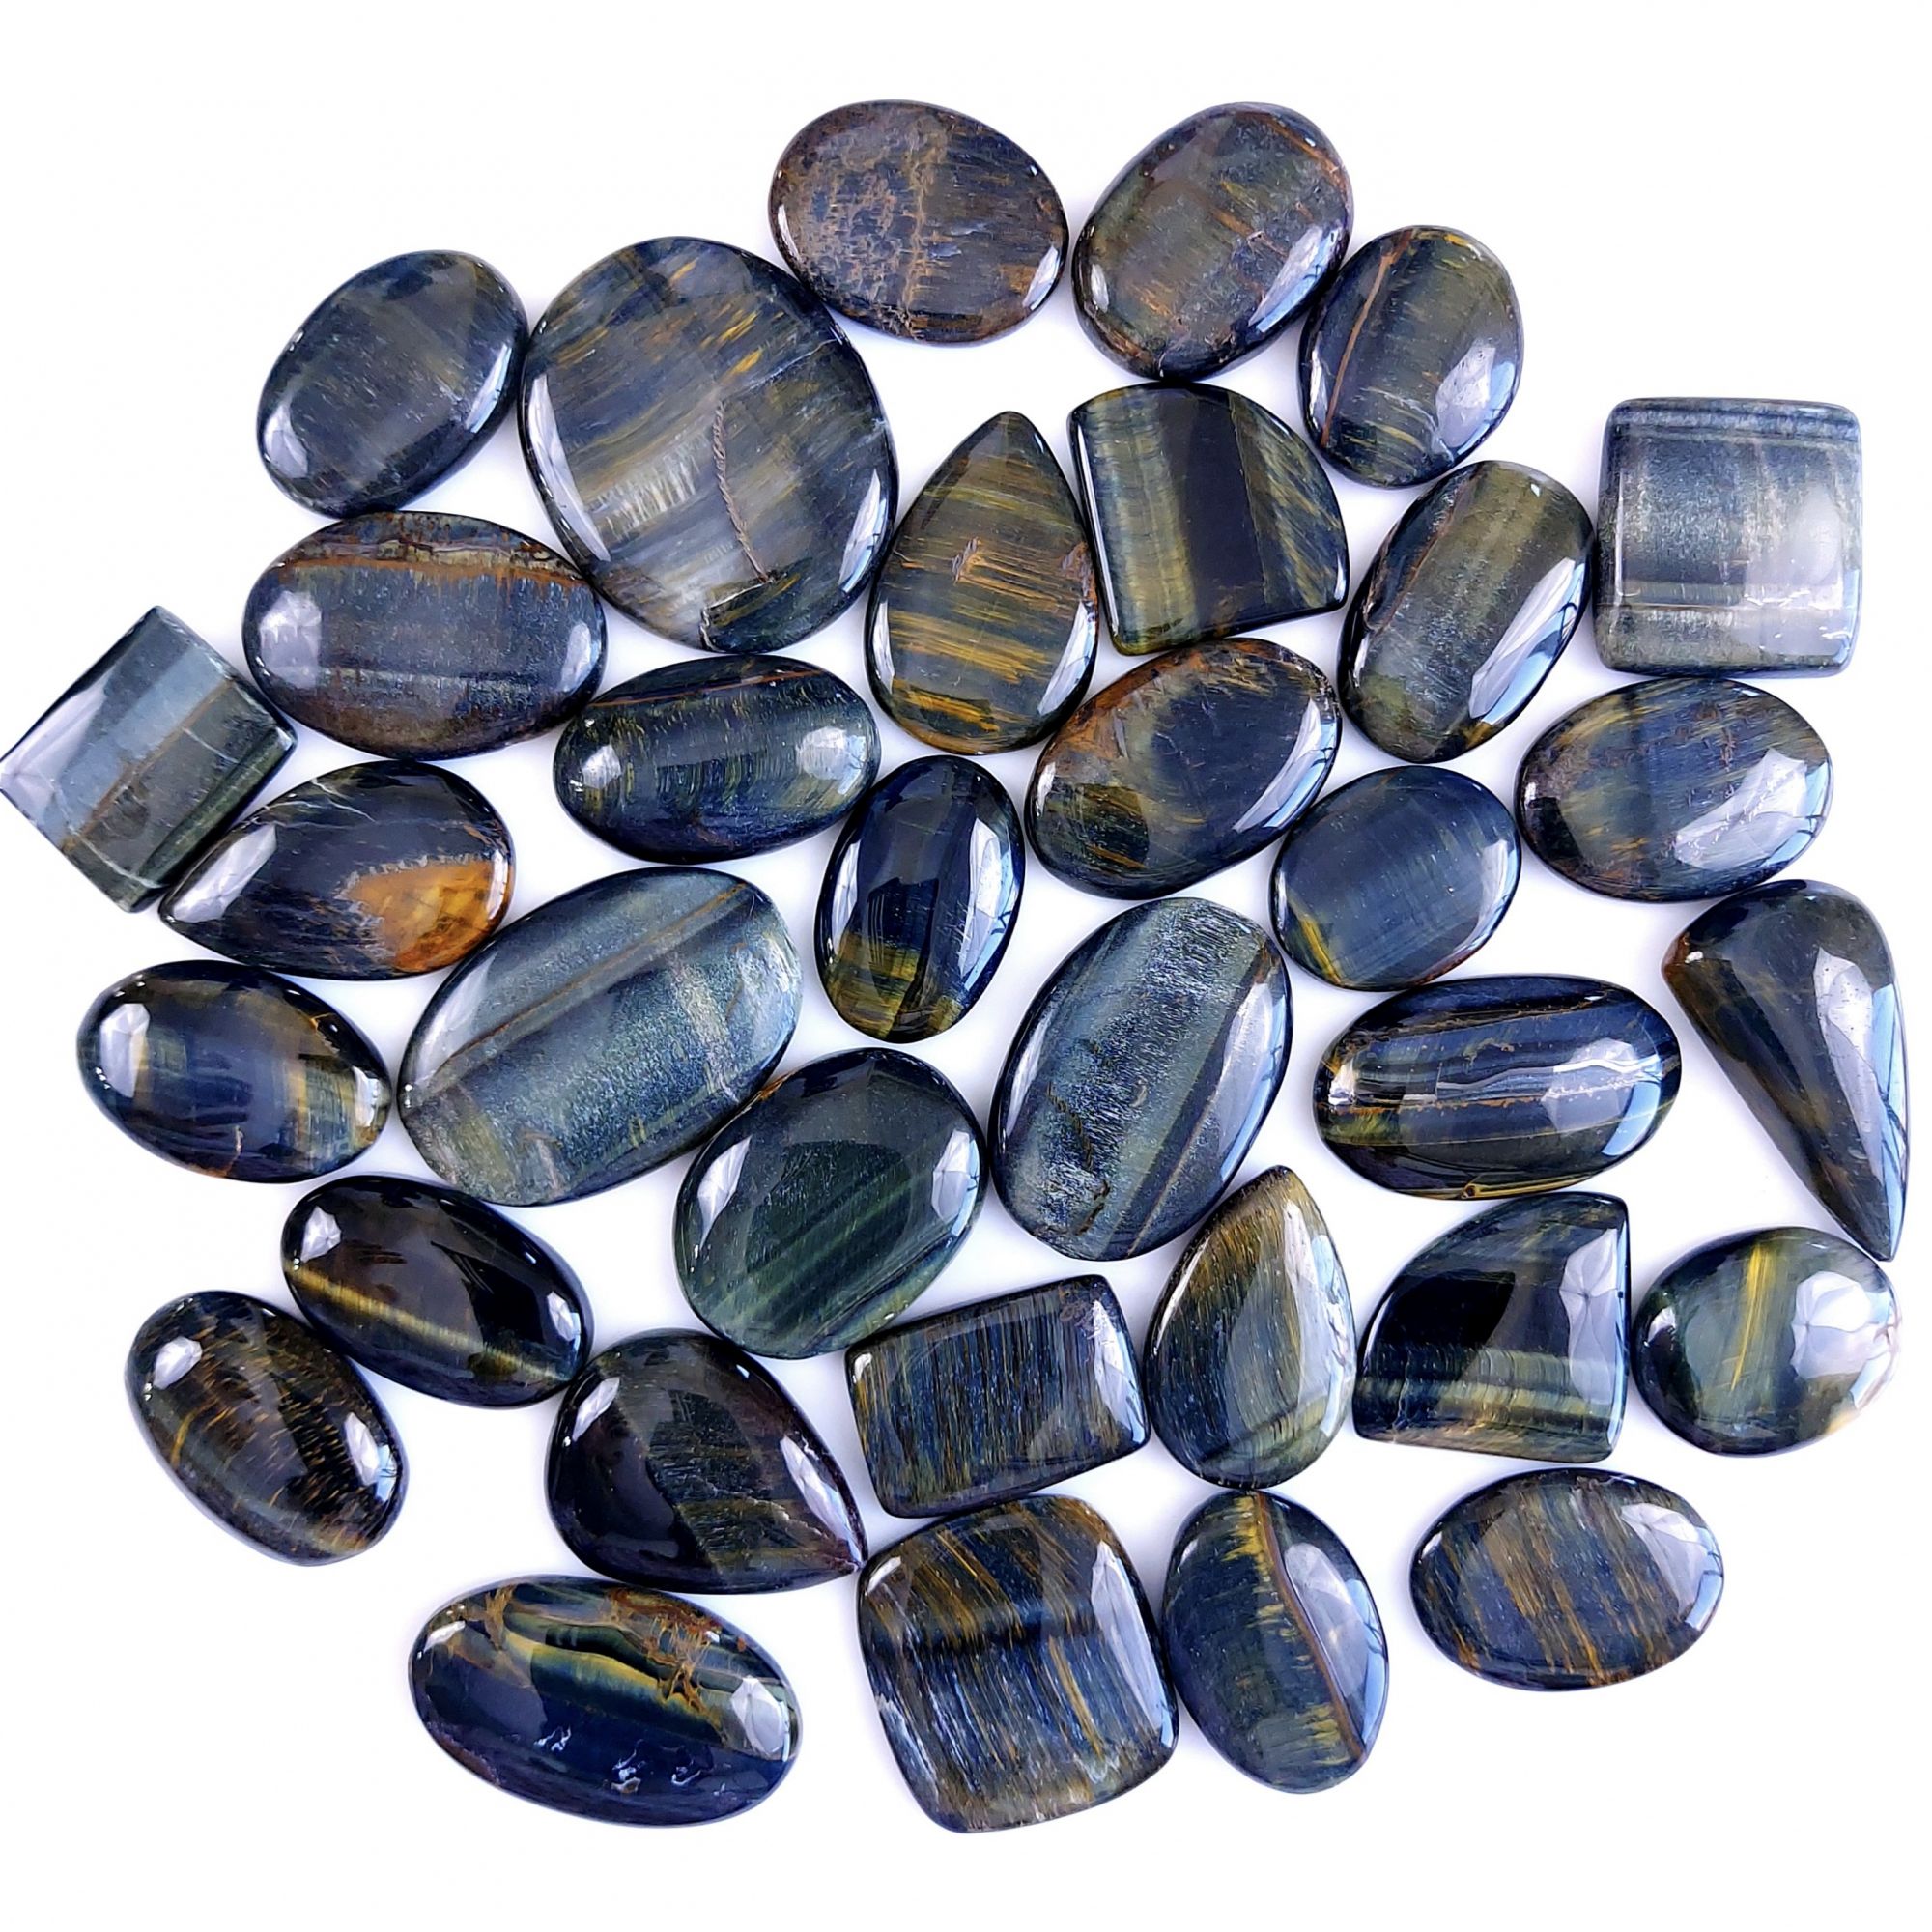 34Pcs 1225Cts Natural Tiger Eye Loose Cabochon Gemstone Lot Mix Shape and and Size for Jewelry Making 40x40 24x20mm#34Pcs 1225Cts Natural Tiger Eye Loose Cabochon Gemstone Lot Mix Shape and and Size for Jewelry Making 40x40 24x20mm#1308